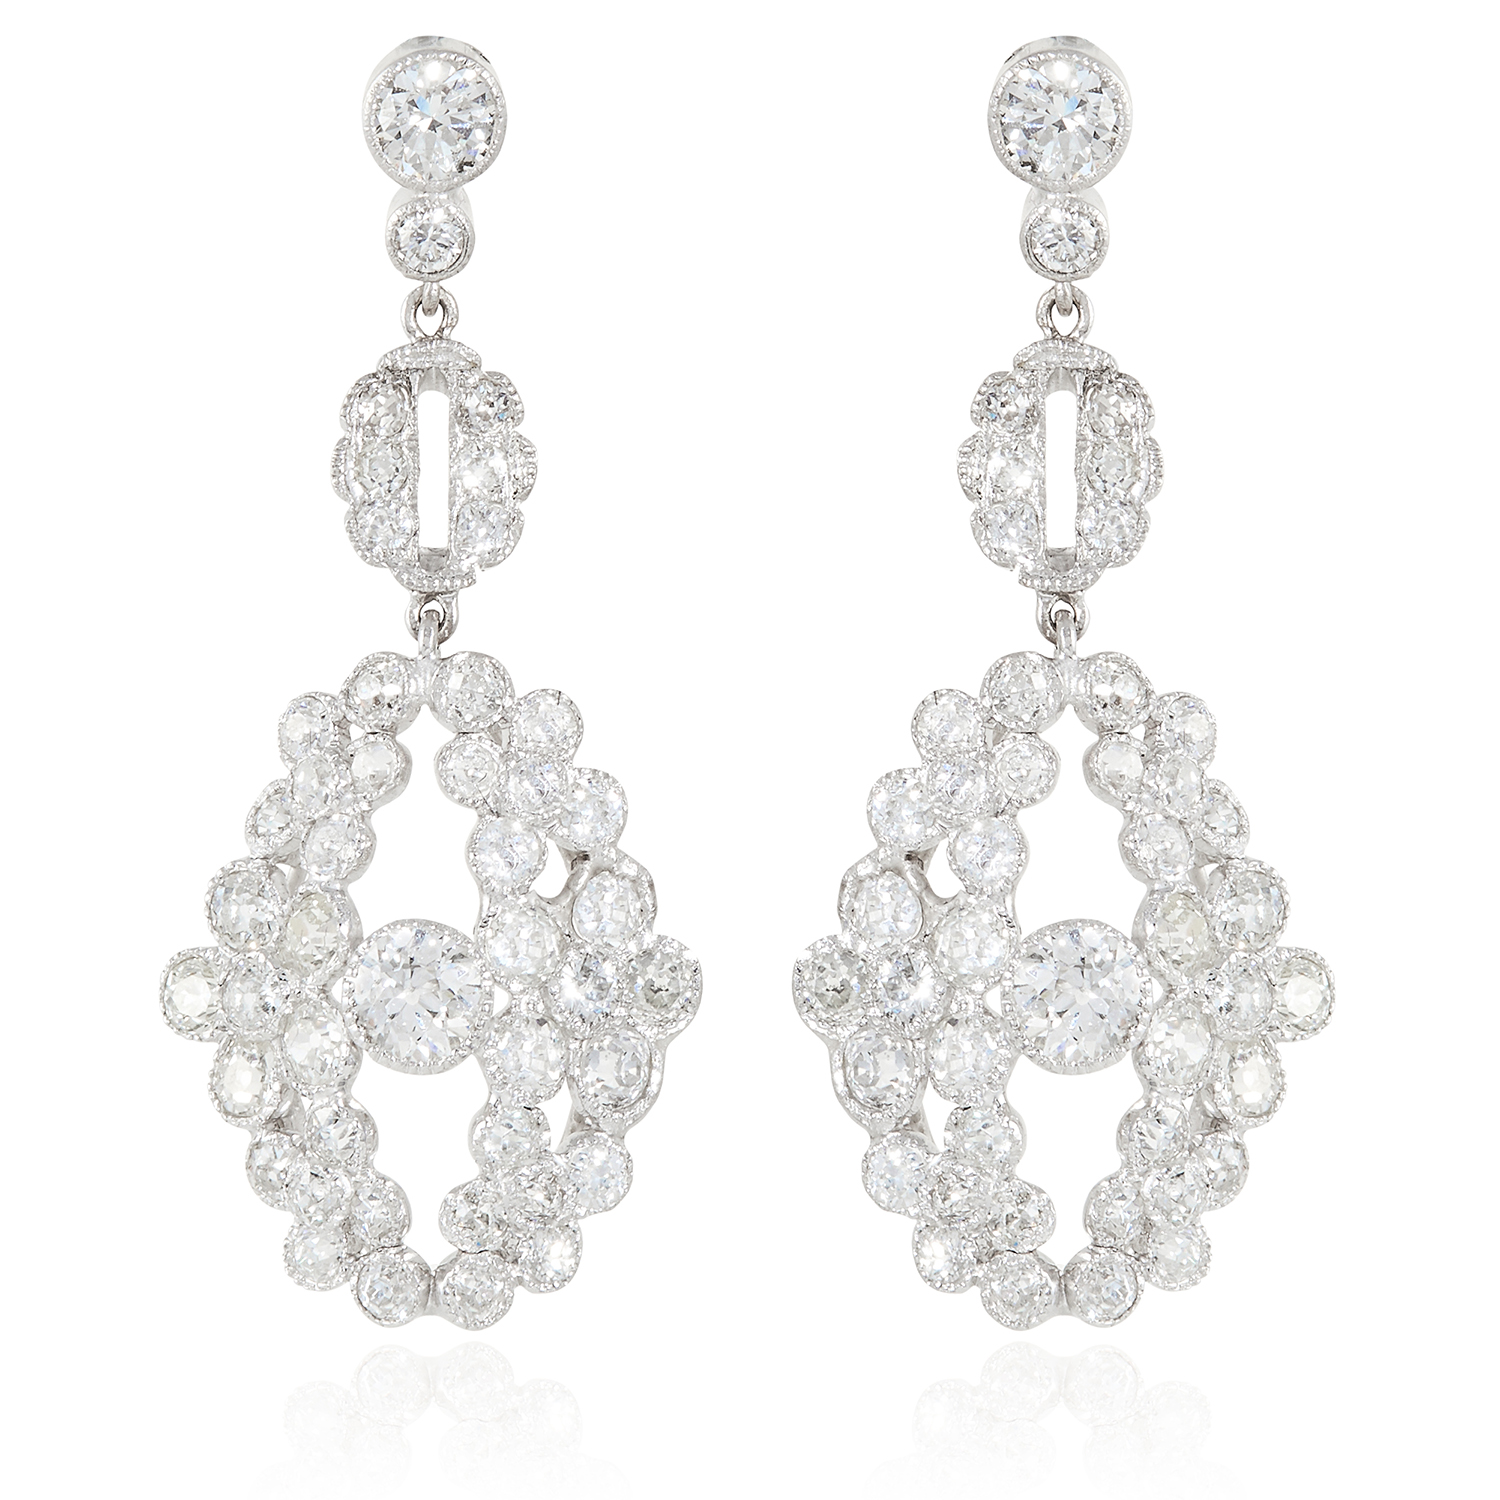 A PAIR OF ANTIQUE 5.25 CARAT DIAMOND EARRINGS in 18ct white gold, each set with a principal old